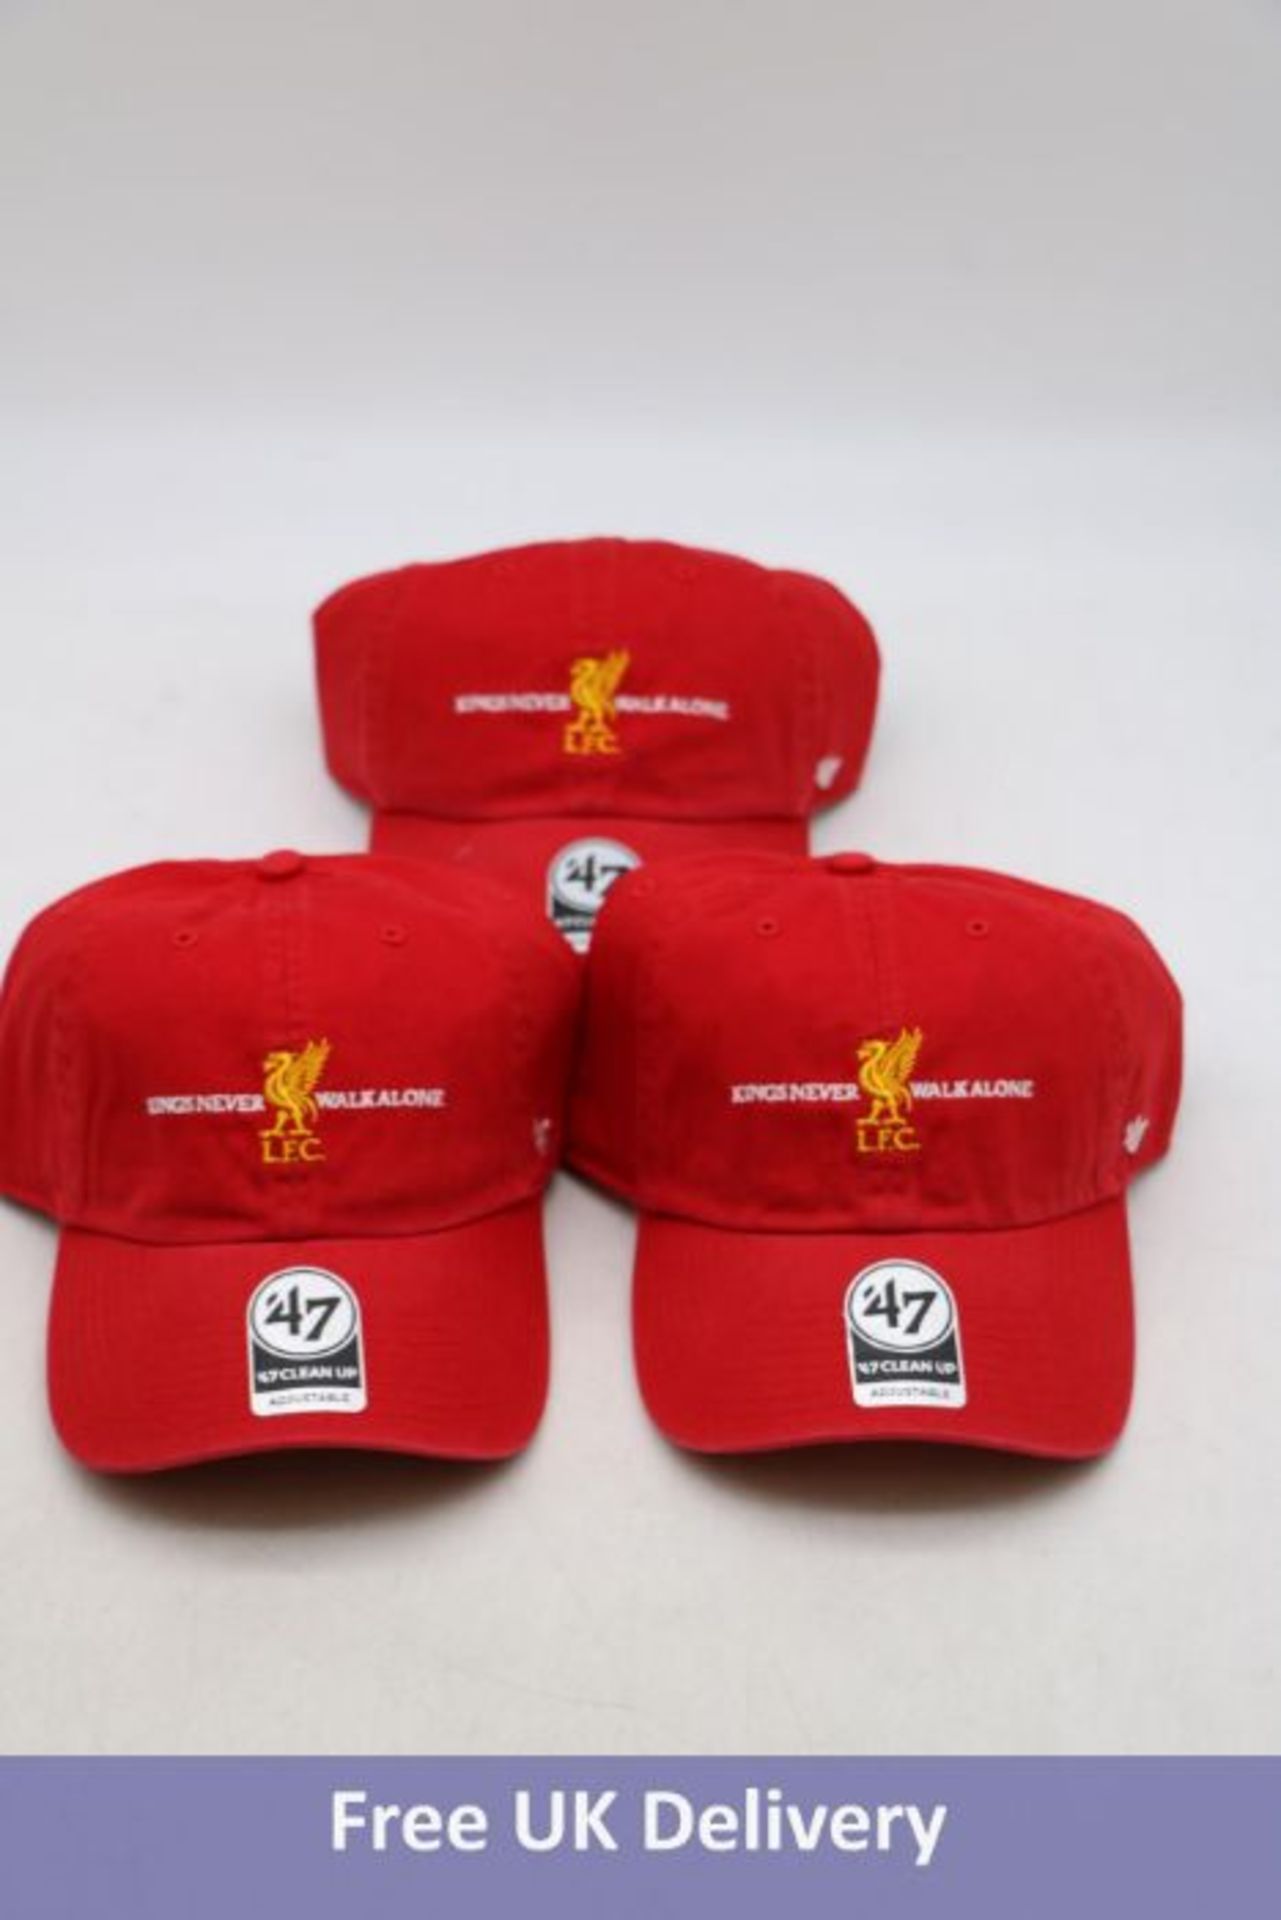 Four 47 Brand Relaxed-Fit Clean Up Arched FC Liverpool, Red Cap